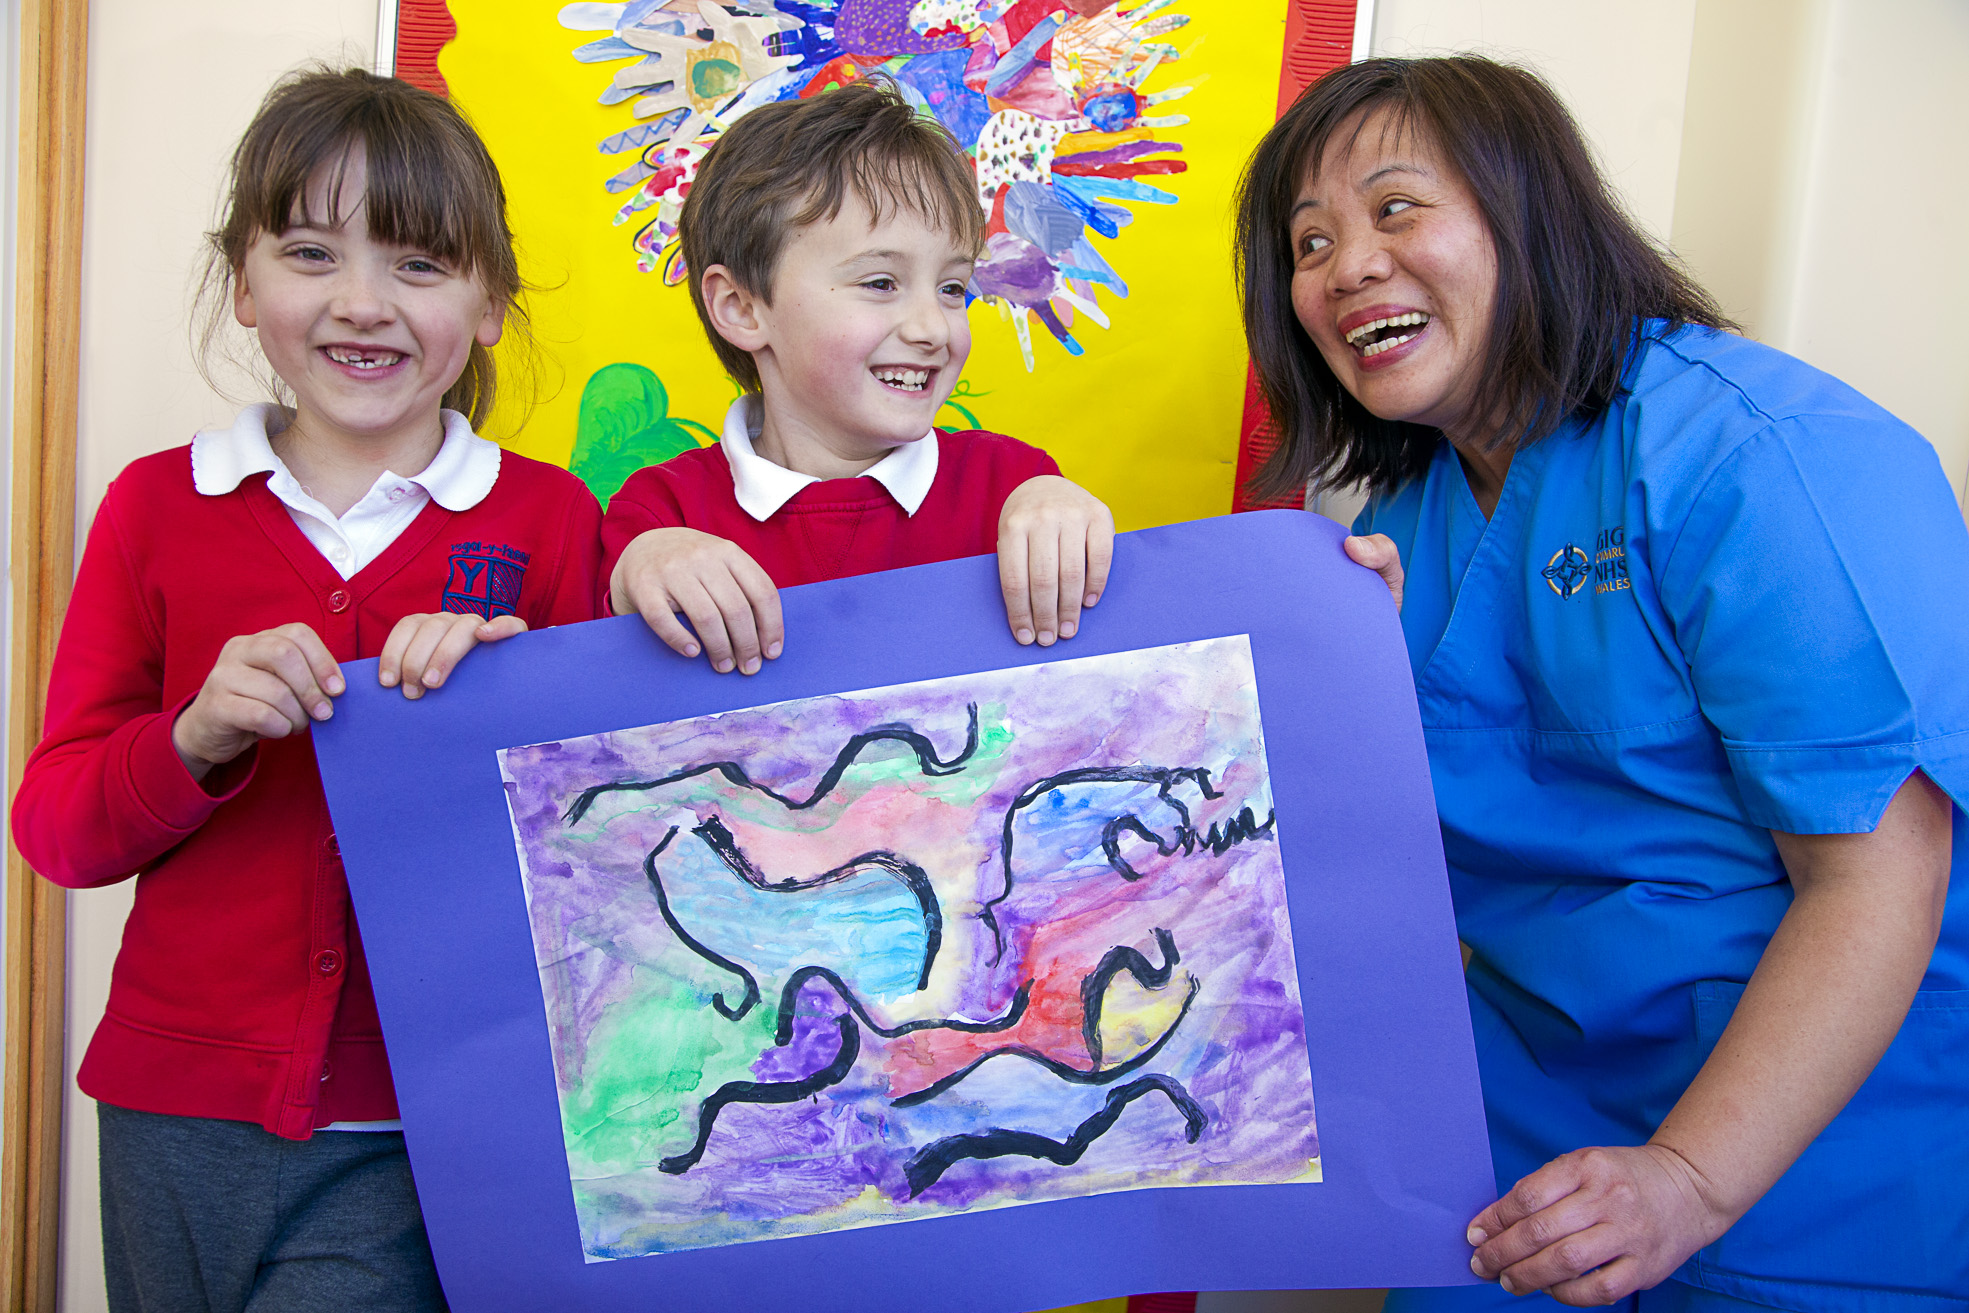 School’s pop-up art gallery in hospital praised by visitors and patients